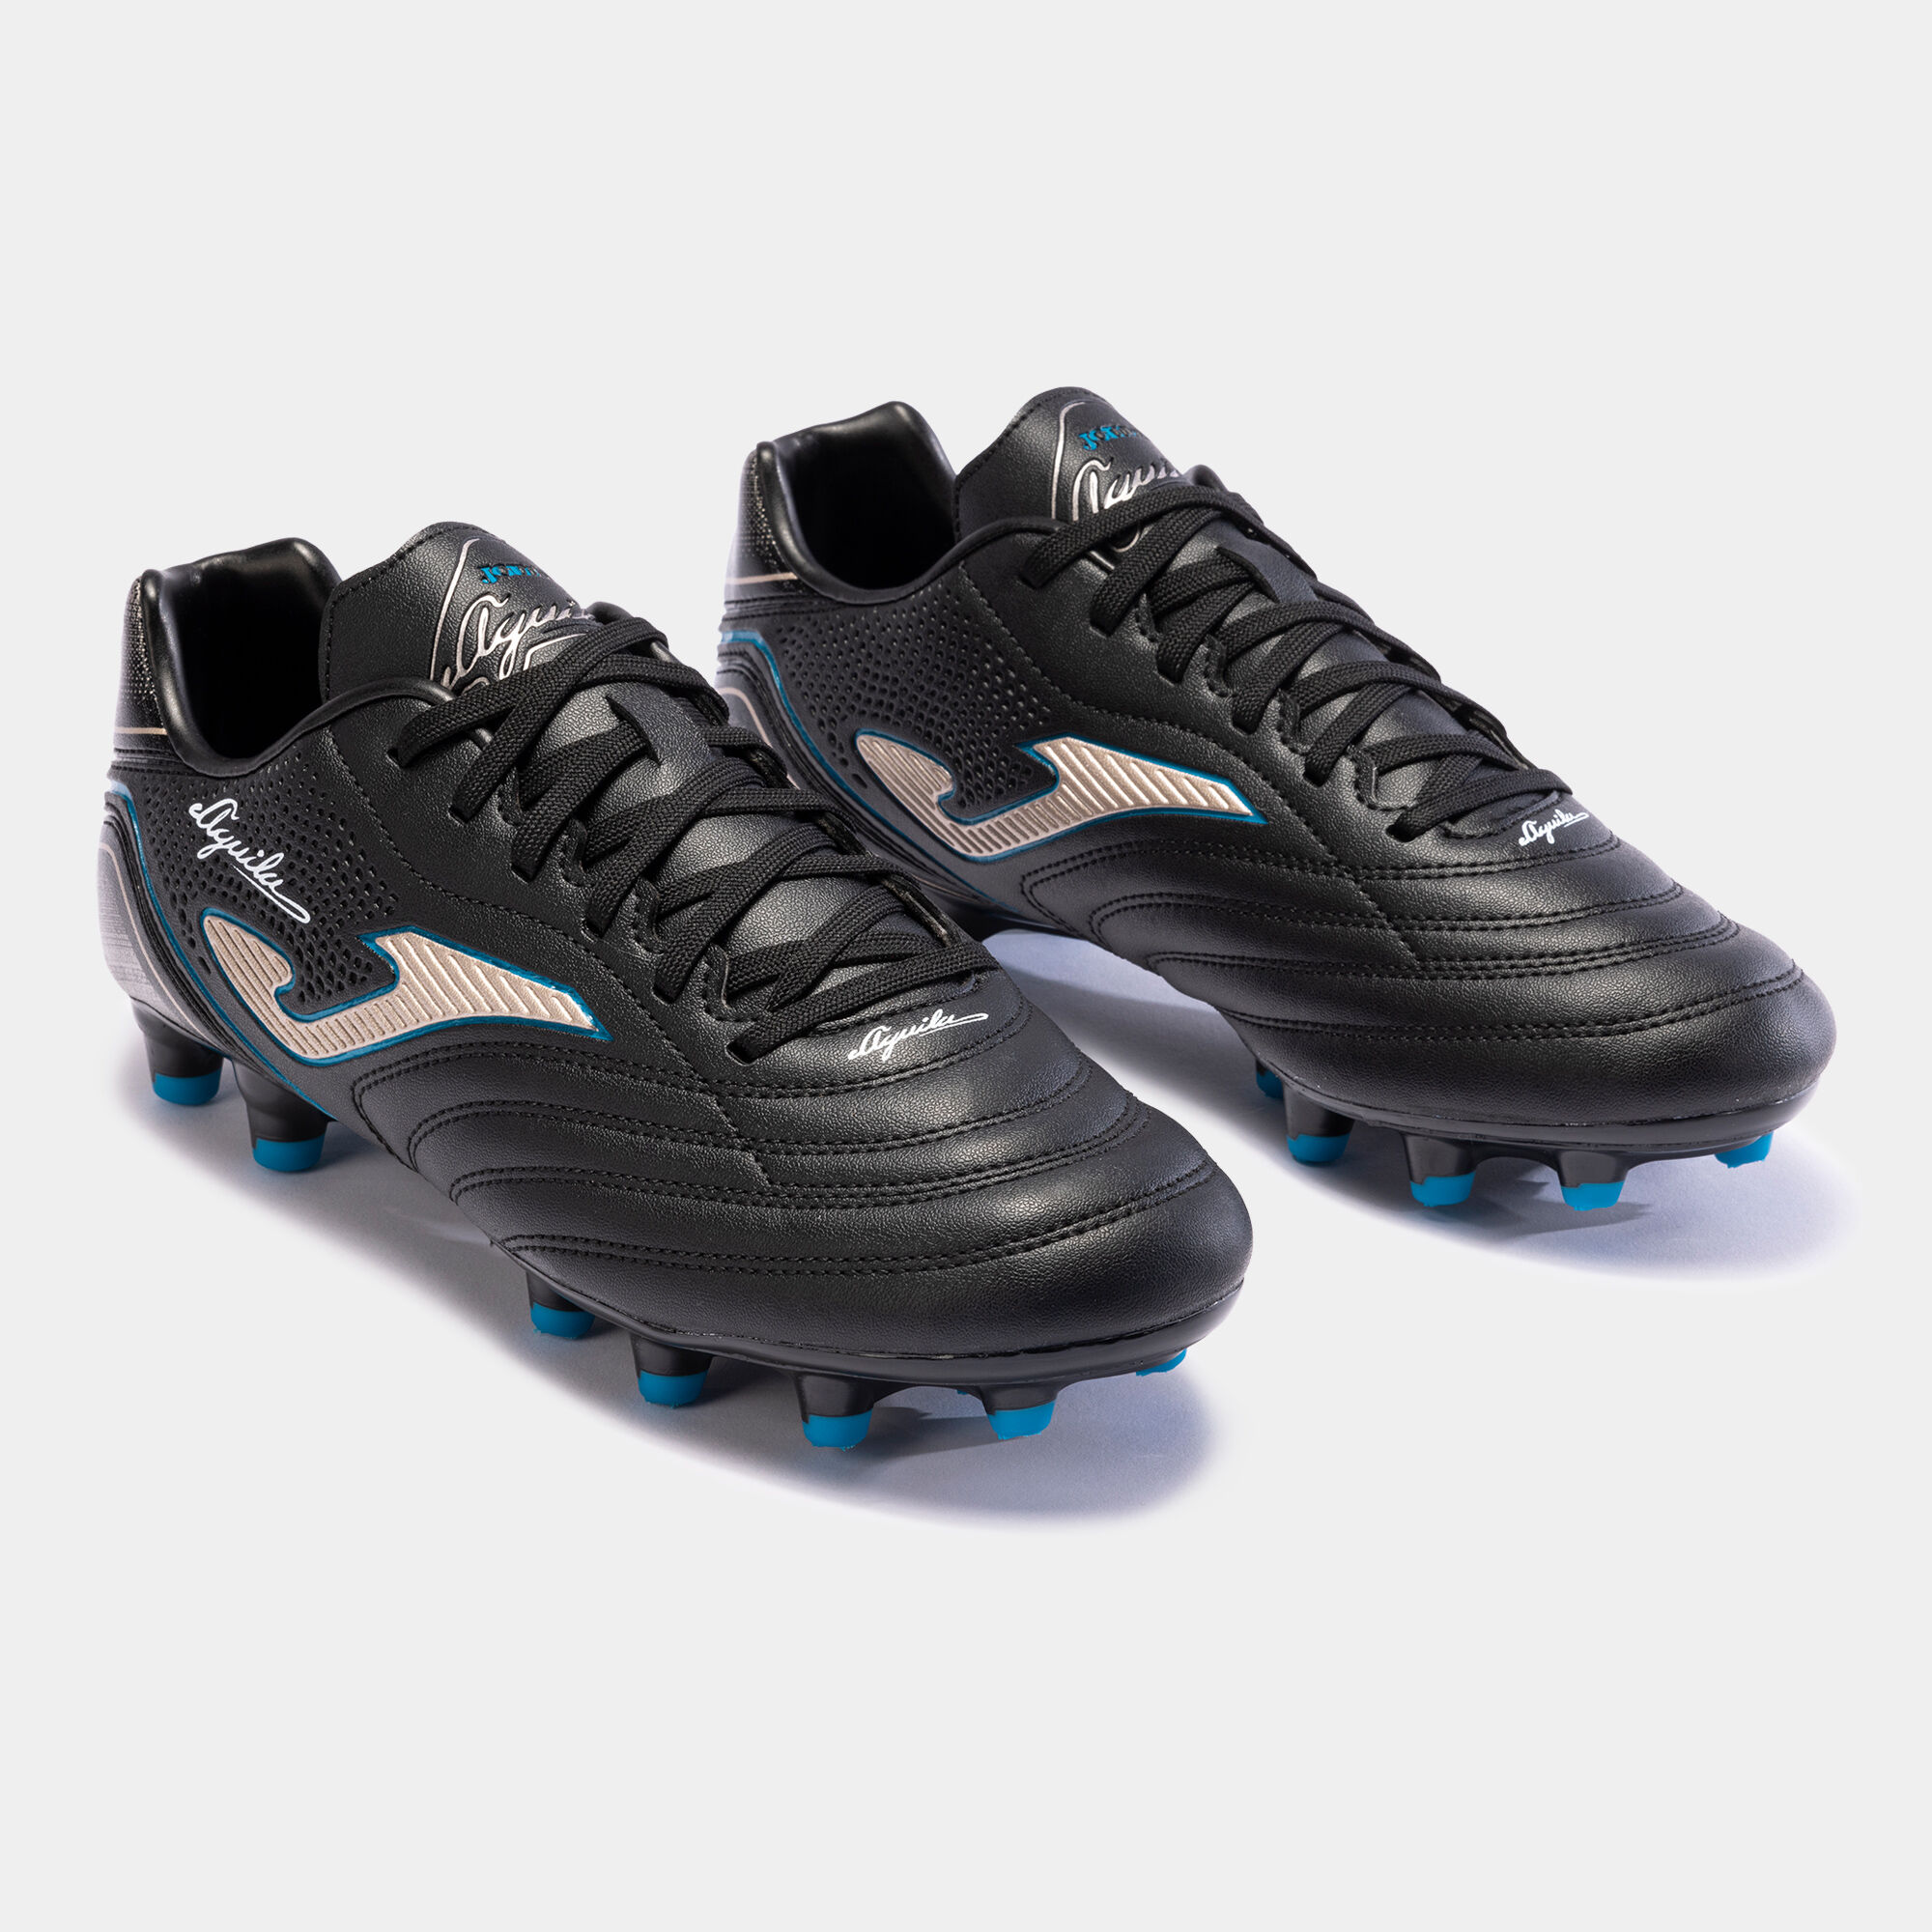 Football boots Aguila 23 firm ground FG black gold